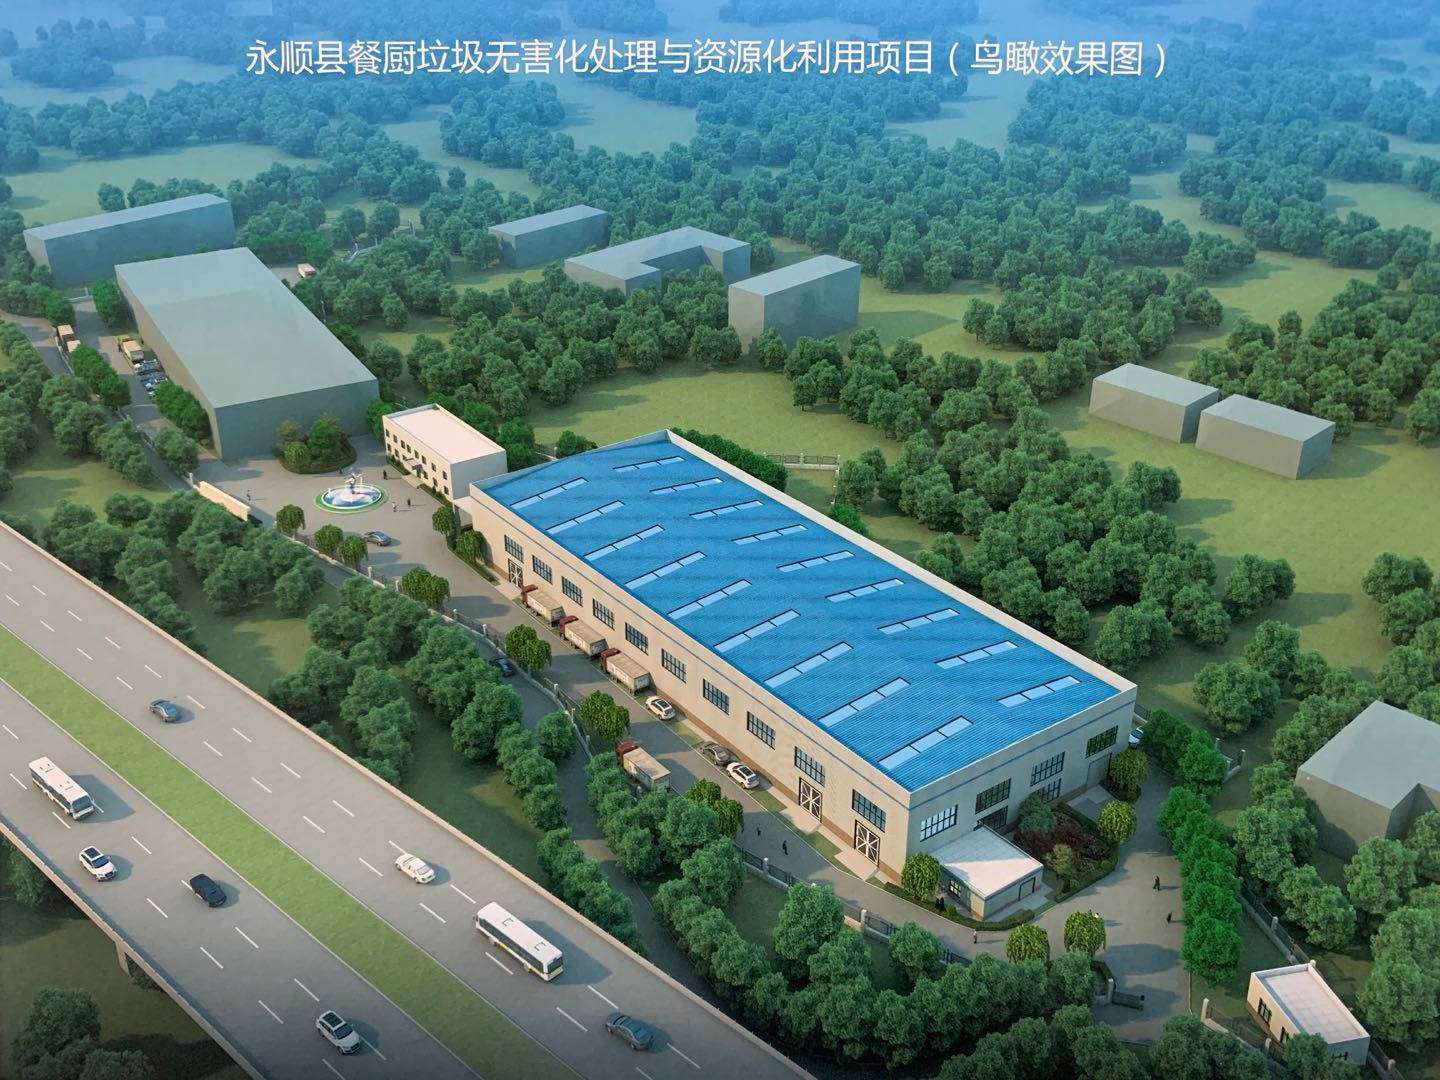 Yongshun County kitchen waste harmless treatment and resource utilization project